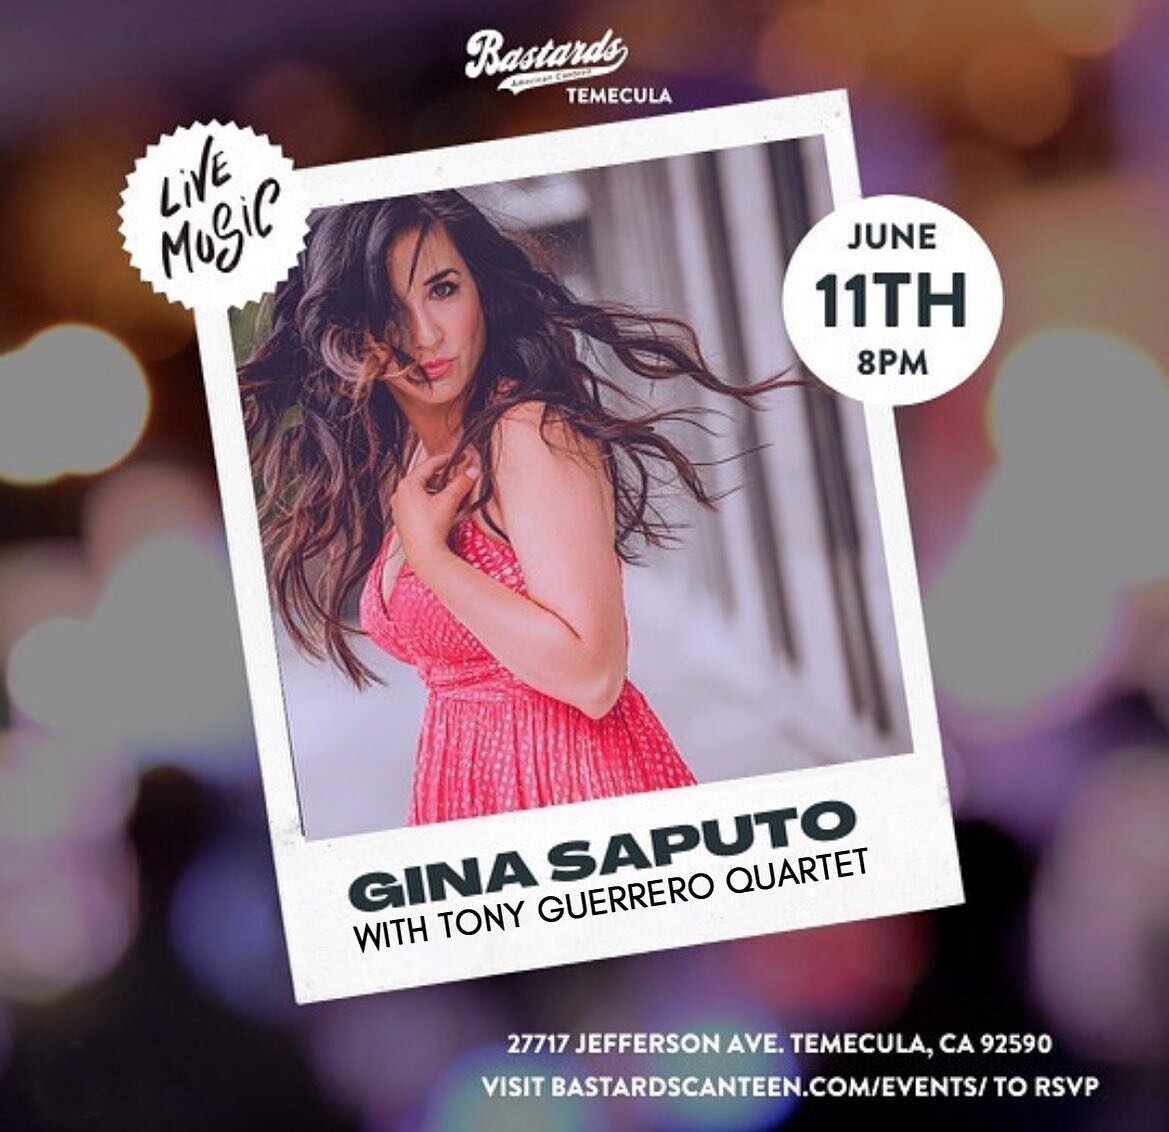 Can&rsquo;t wait for this! 💕 come out, Temecula!&hellip;la la la. 
Featuring myself with: 
Tony Guerrero- trumpet
Miles Jensen - gtr
Anthony Shadduck - bass
Dean Koba - drums

Repost from @bastardscanteen
&bull;
Bastards Temecula presents Gina Sa